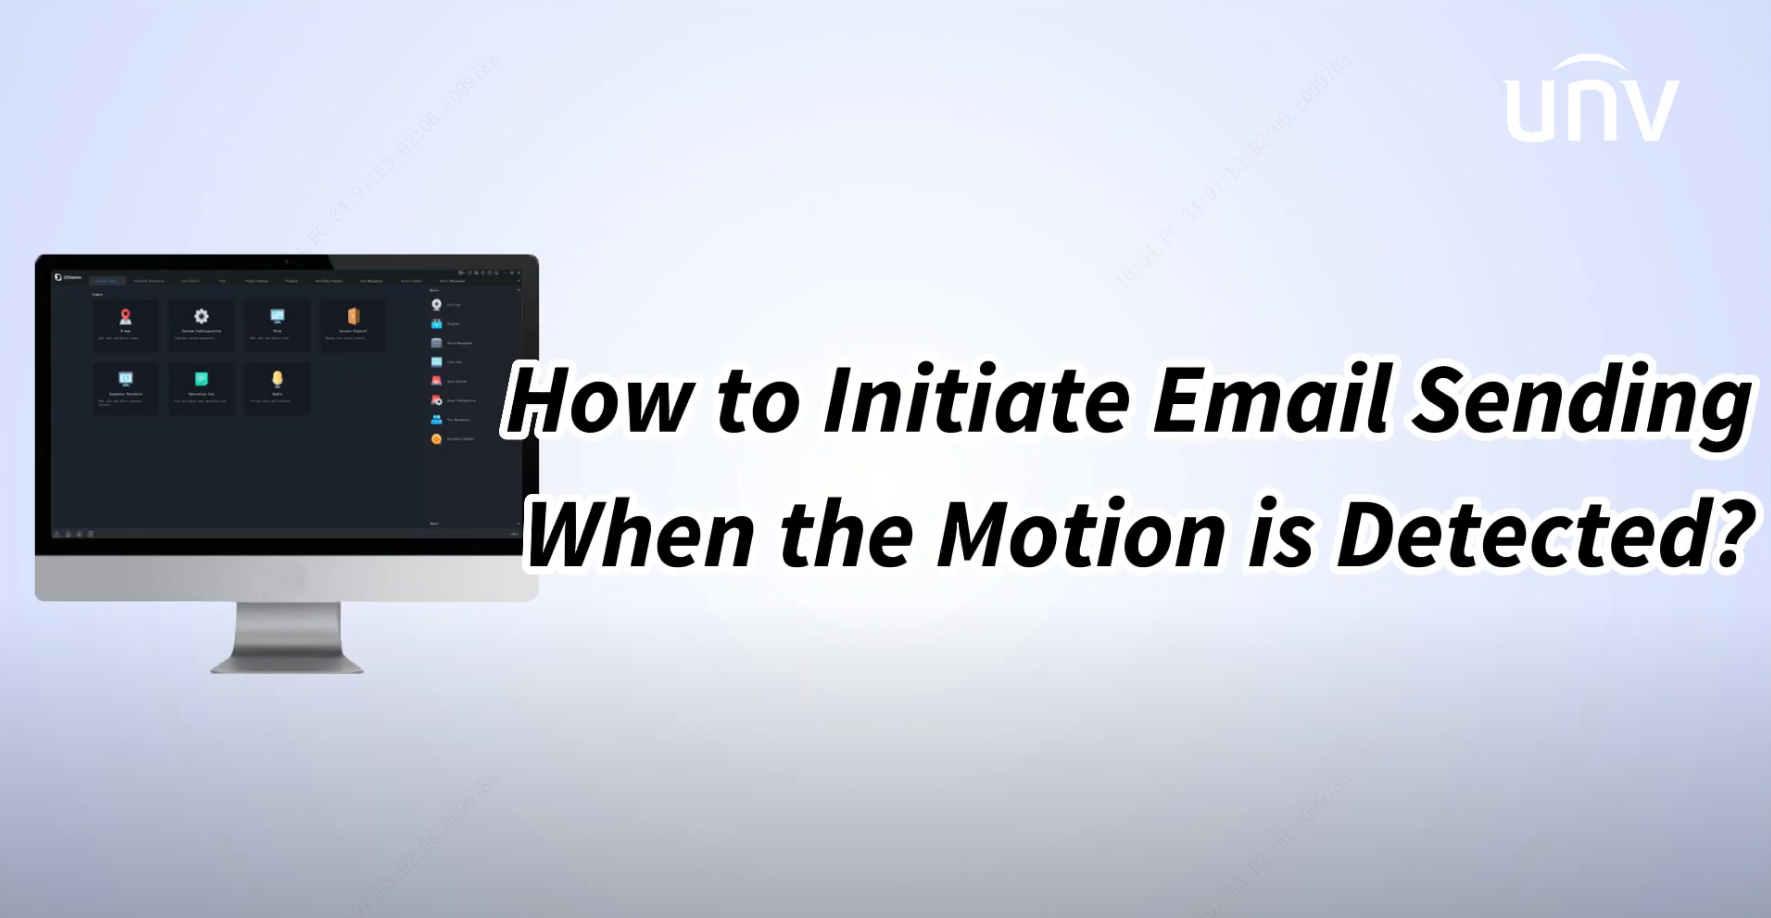 Send Email when Motion Image